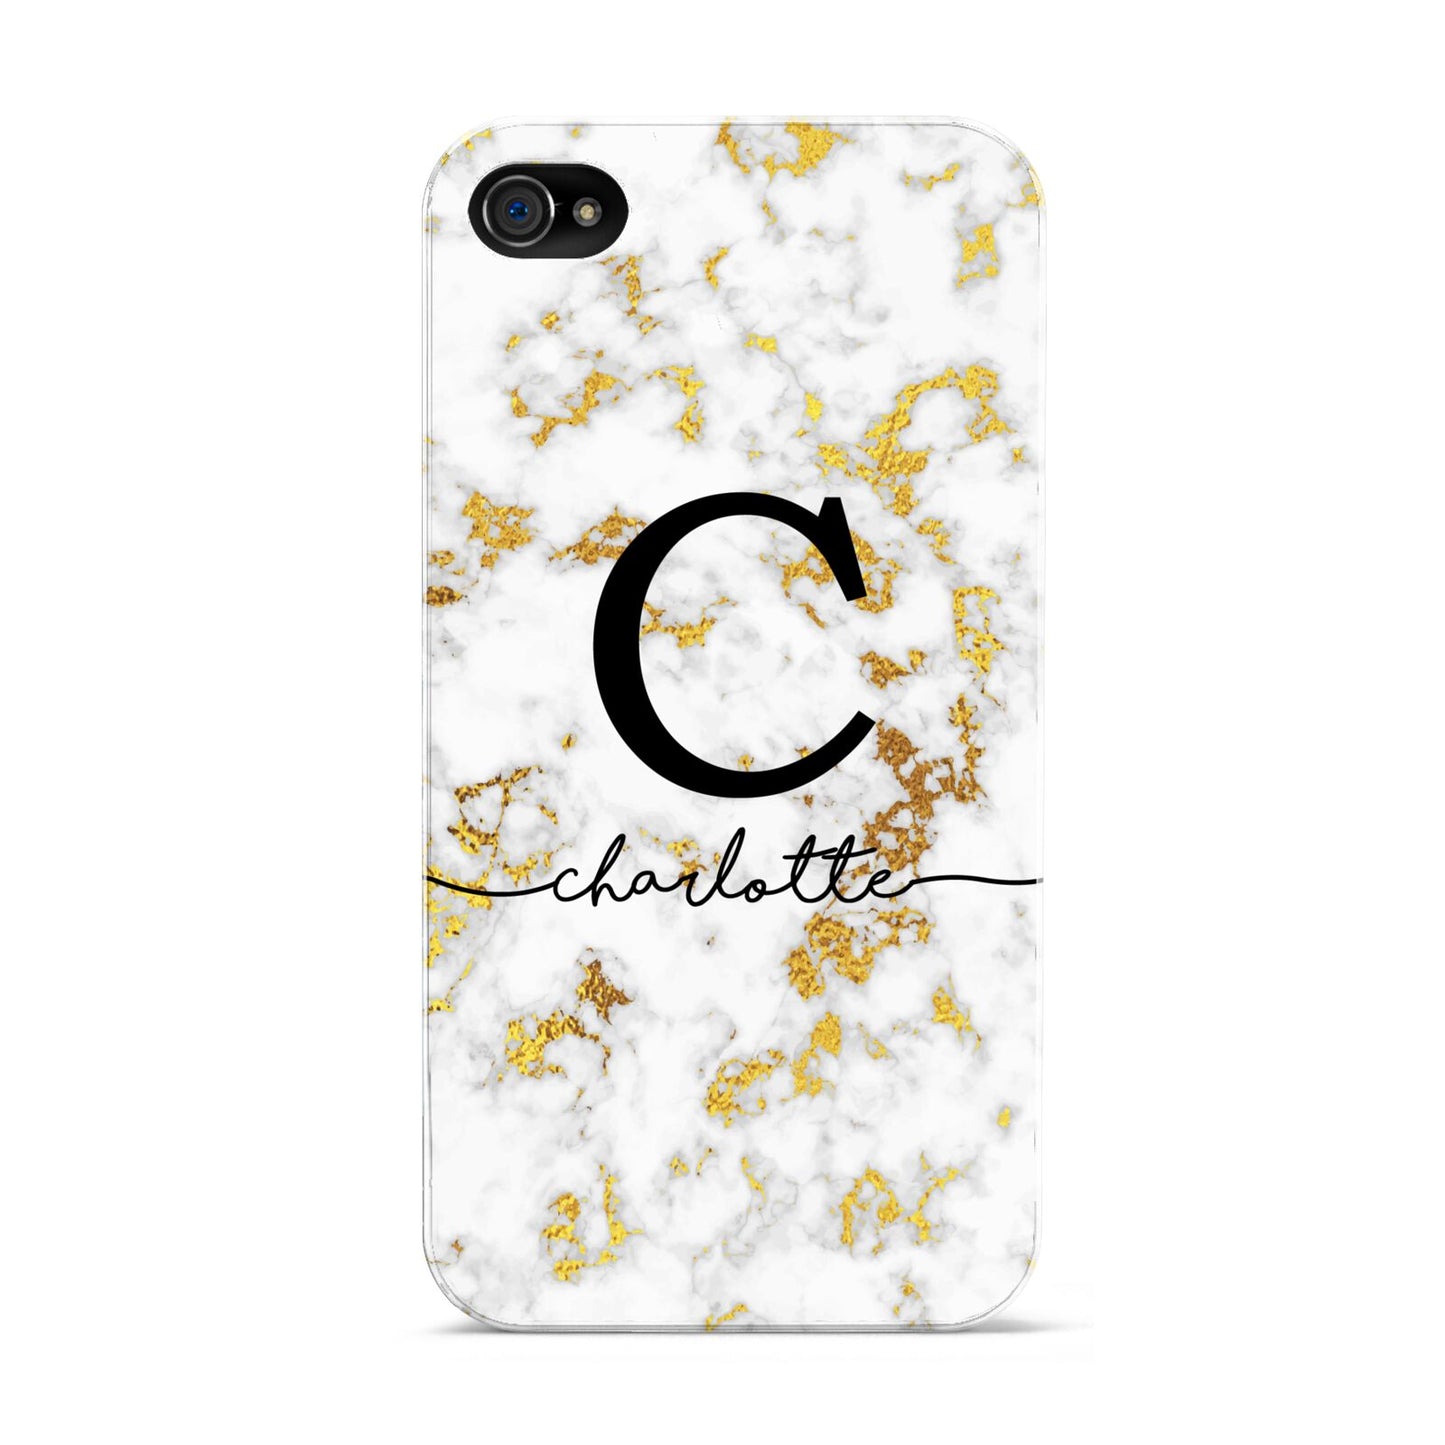 Initialled White Gold Marble with Name Apple iPhone 4s Case